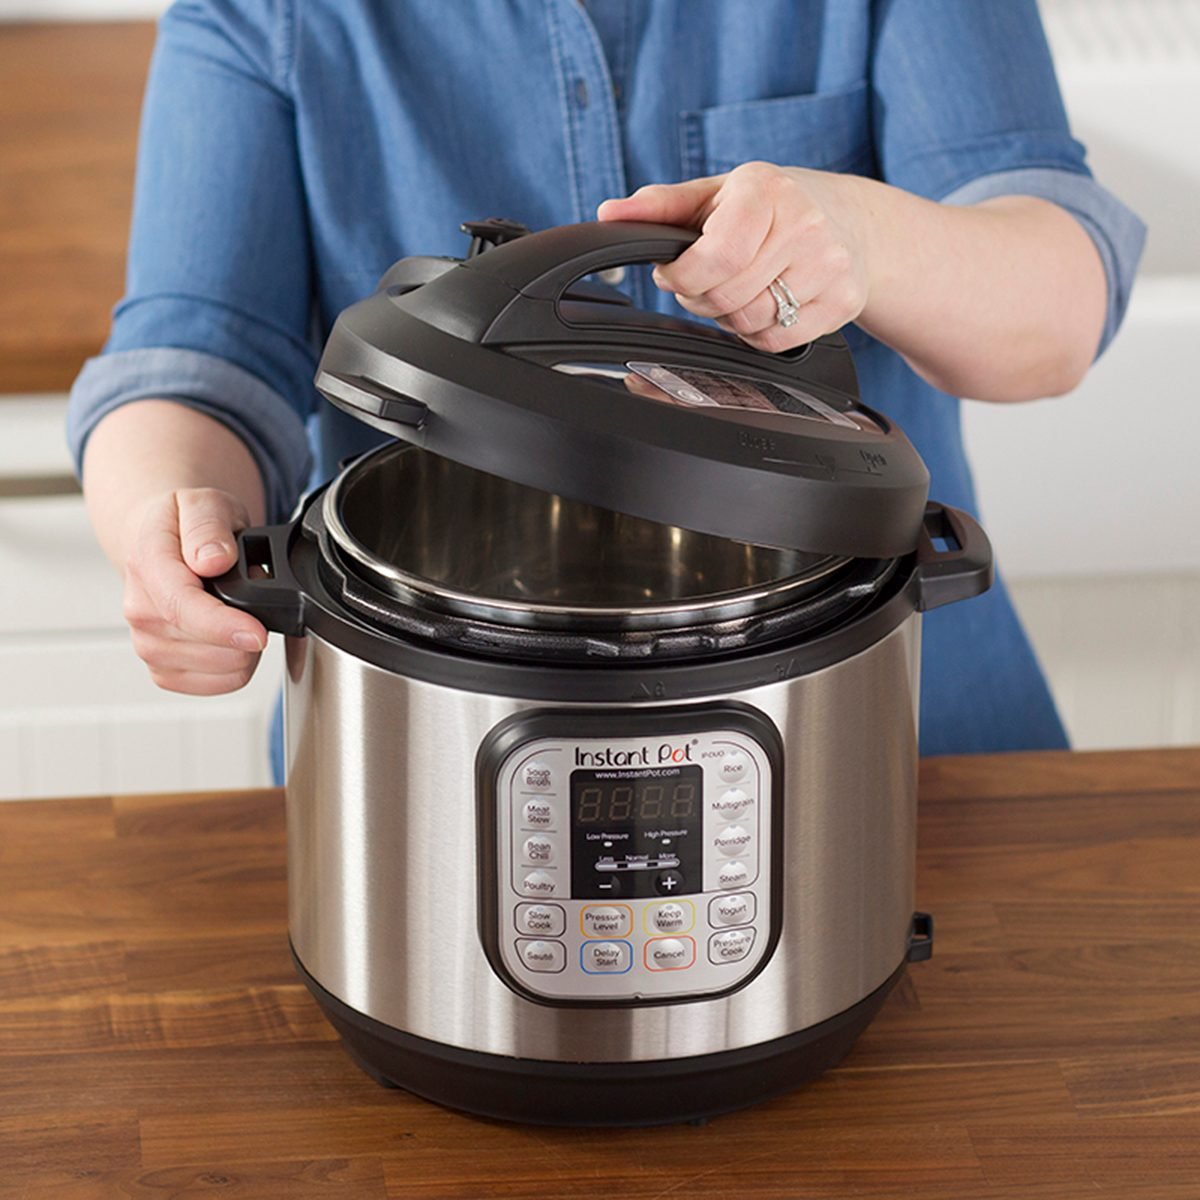 This Is the First Thing to Do with Your New Pressure Cooker